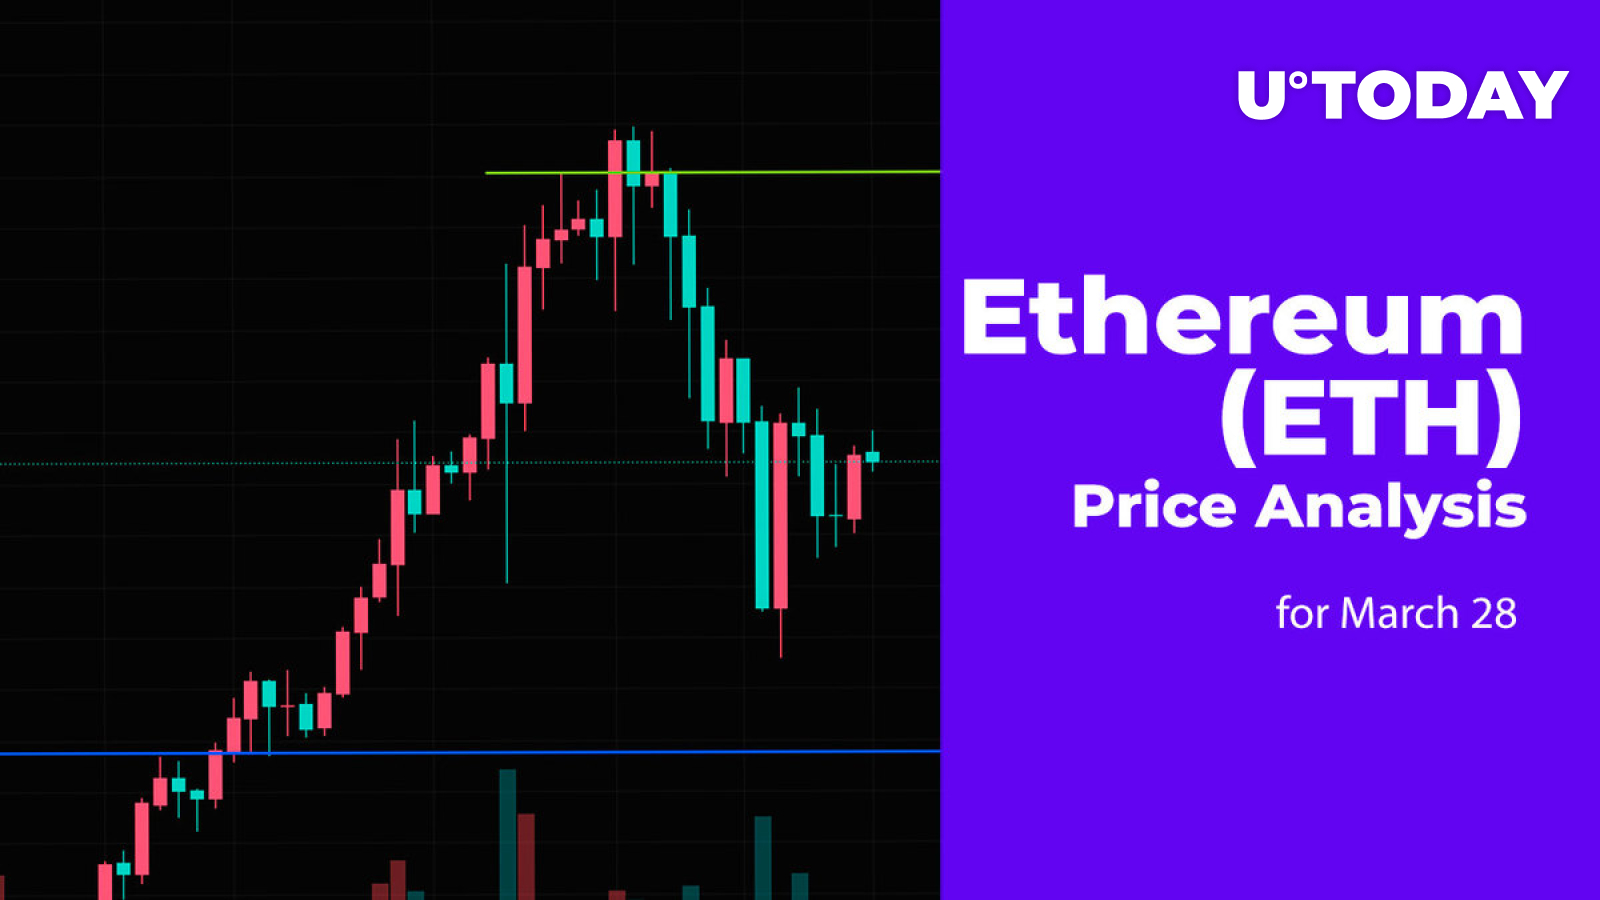 Ethereum (ETH) Price Prediction for March 28